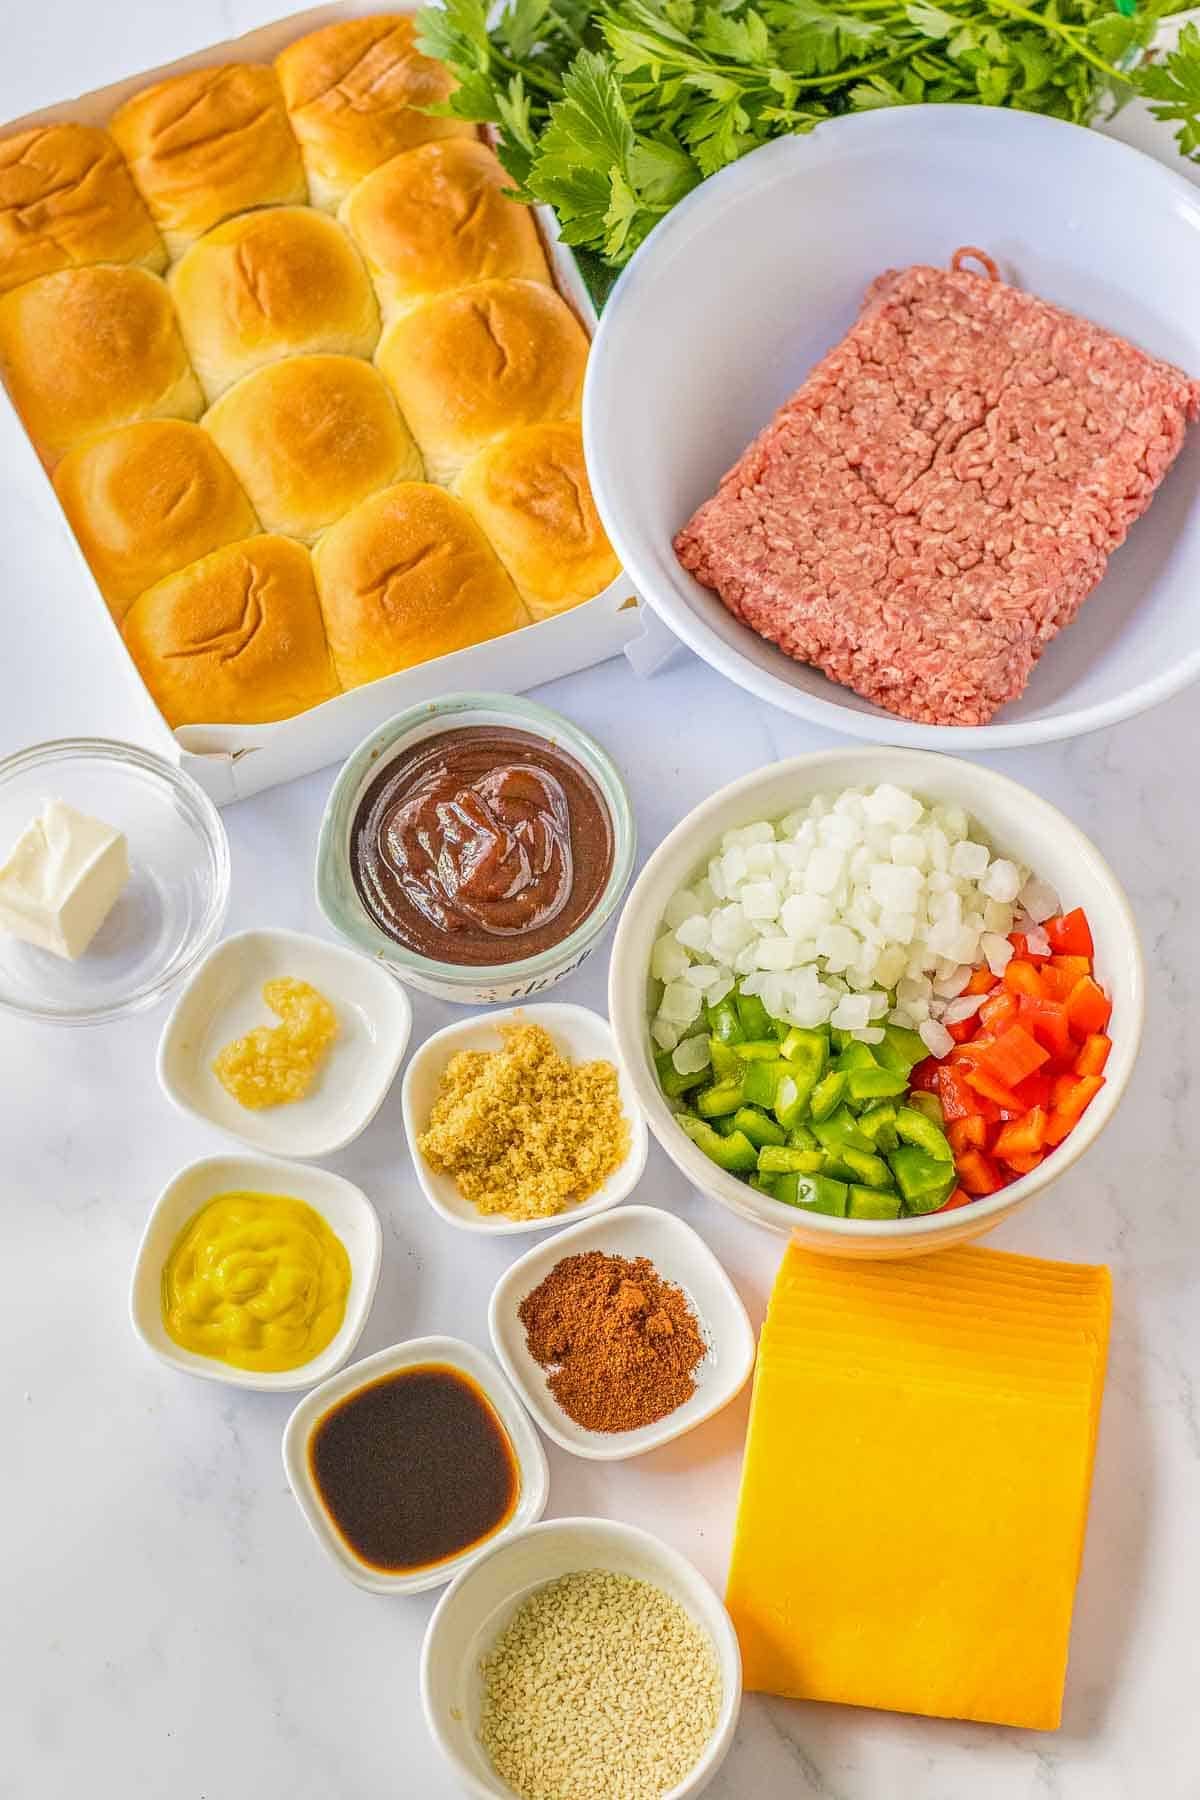 Ingredients for Sloppy Joe Sliders - Ground beef, red bell pepper, green bell pepper, onion, garlic, bbq sauce, chili powder, brown sugar, mustard, worcestershire sauce, cheddar cheese, Hawaiian rolls, butter, sesame seeds and parsley.